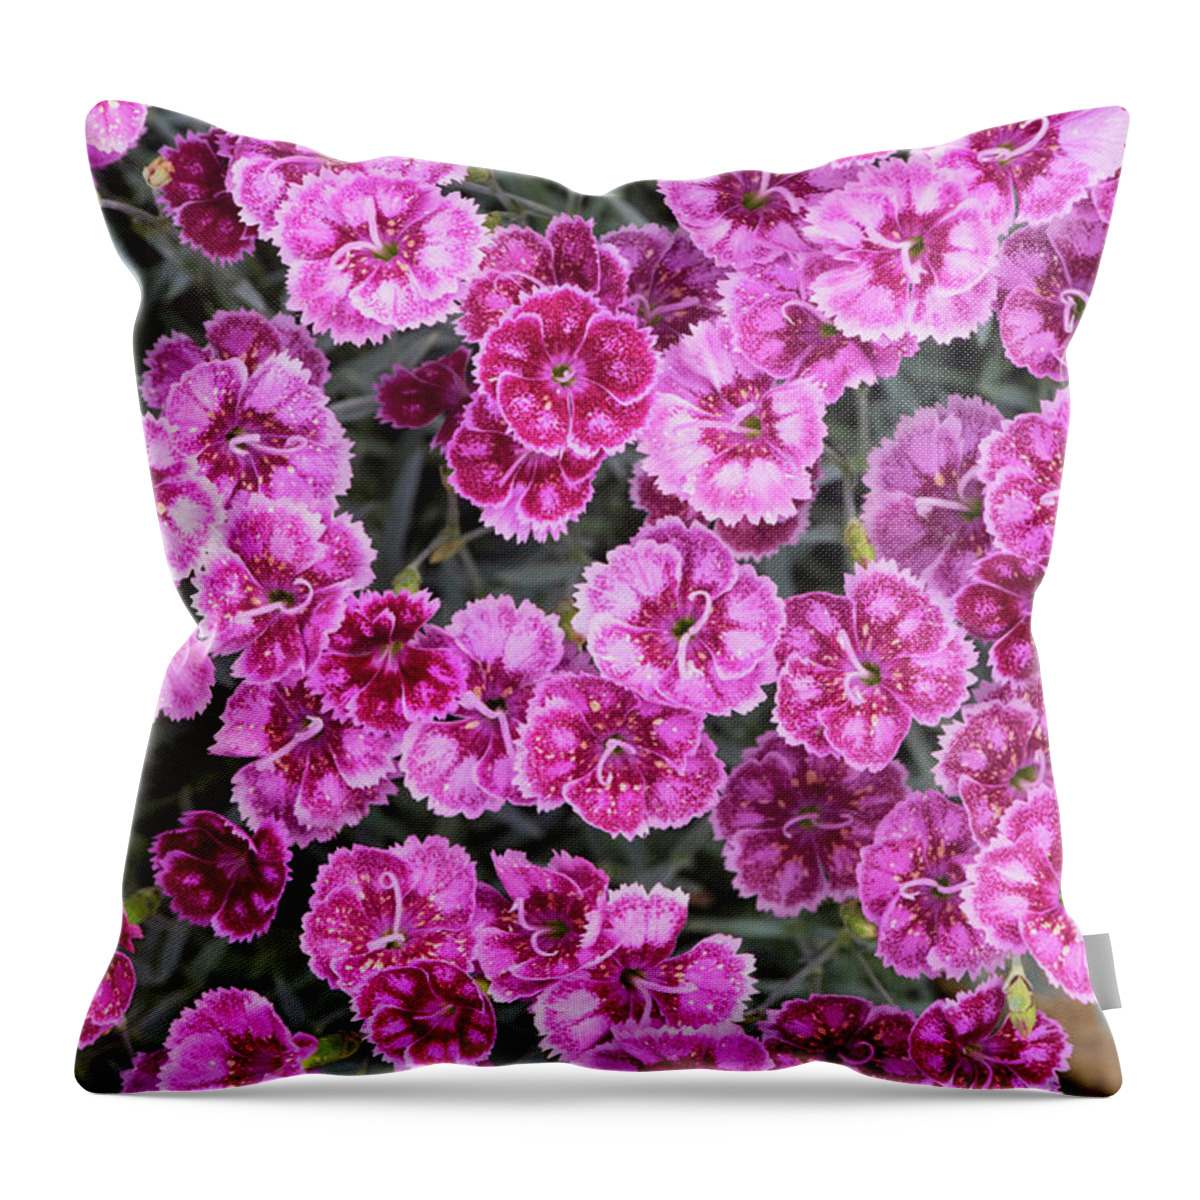 Dianthus Gold Dust Throw Pillow featuring the photograph Dianthus Gold Dust by Tim Gainey